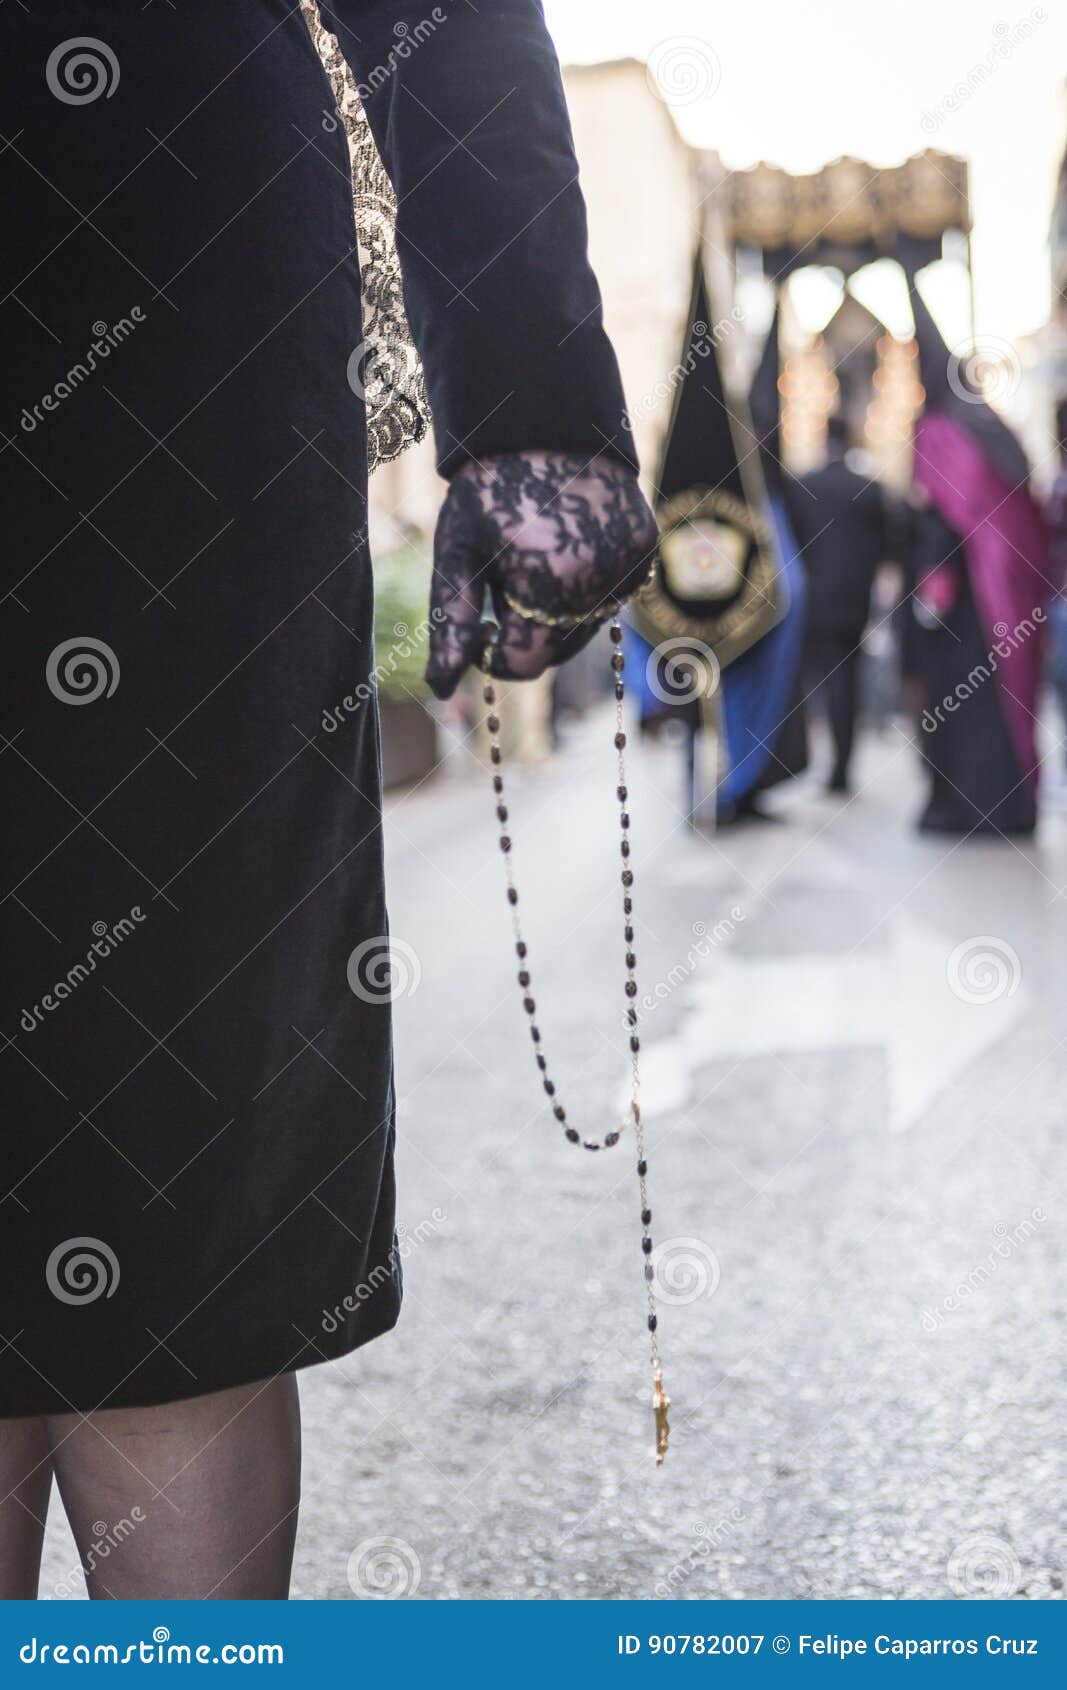 woman dressed in mantilla during a procession